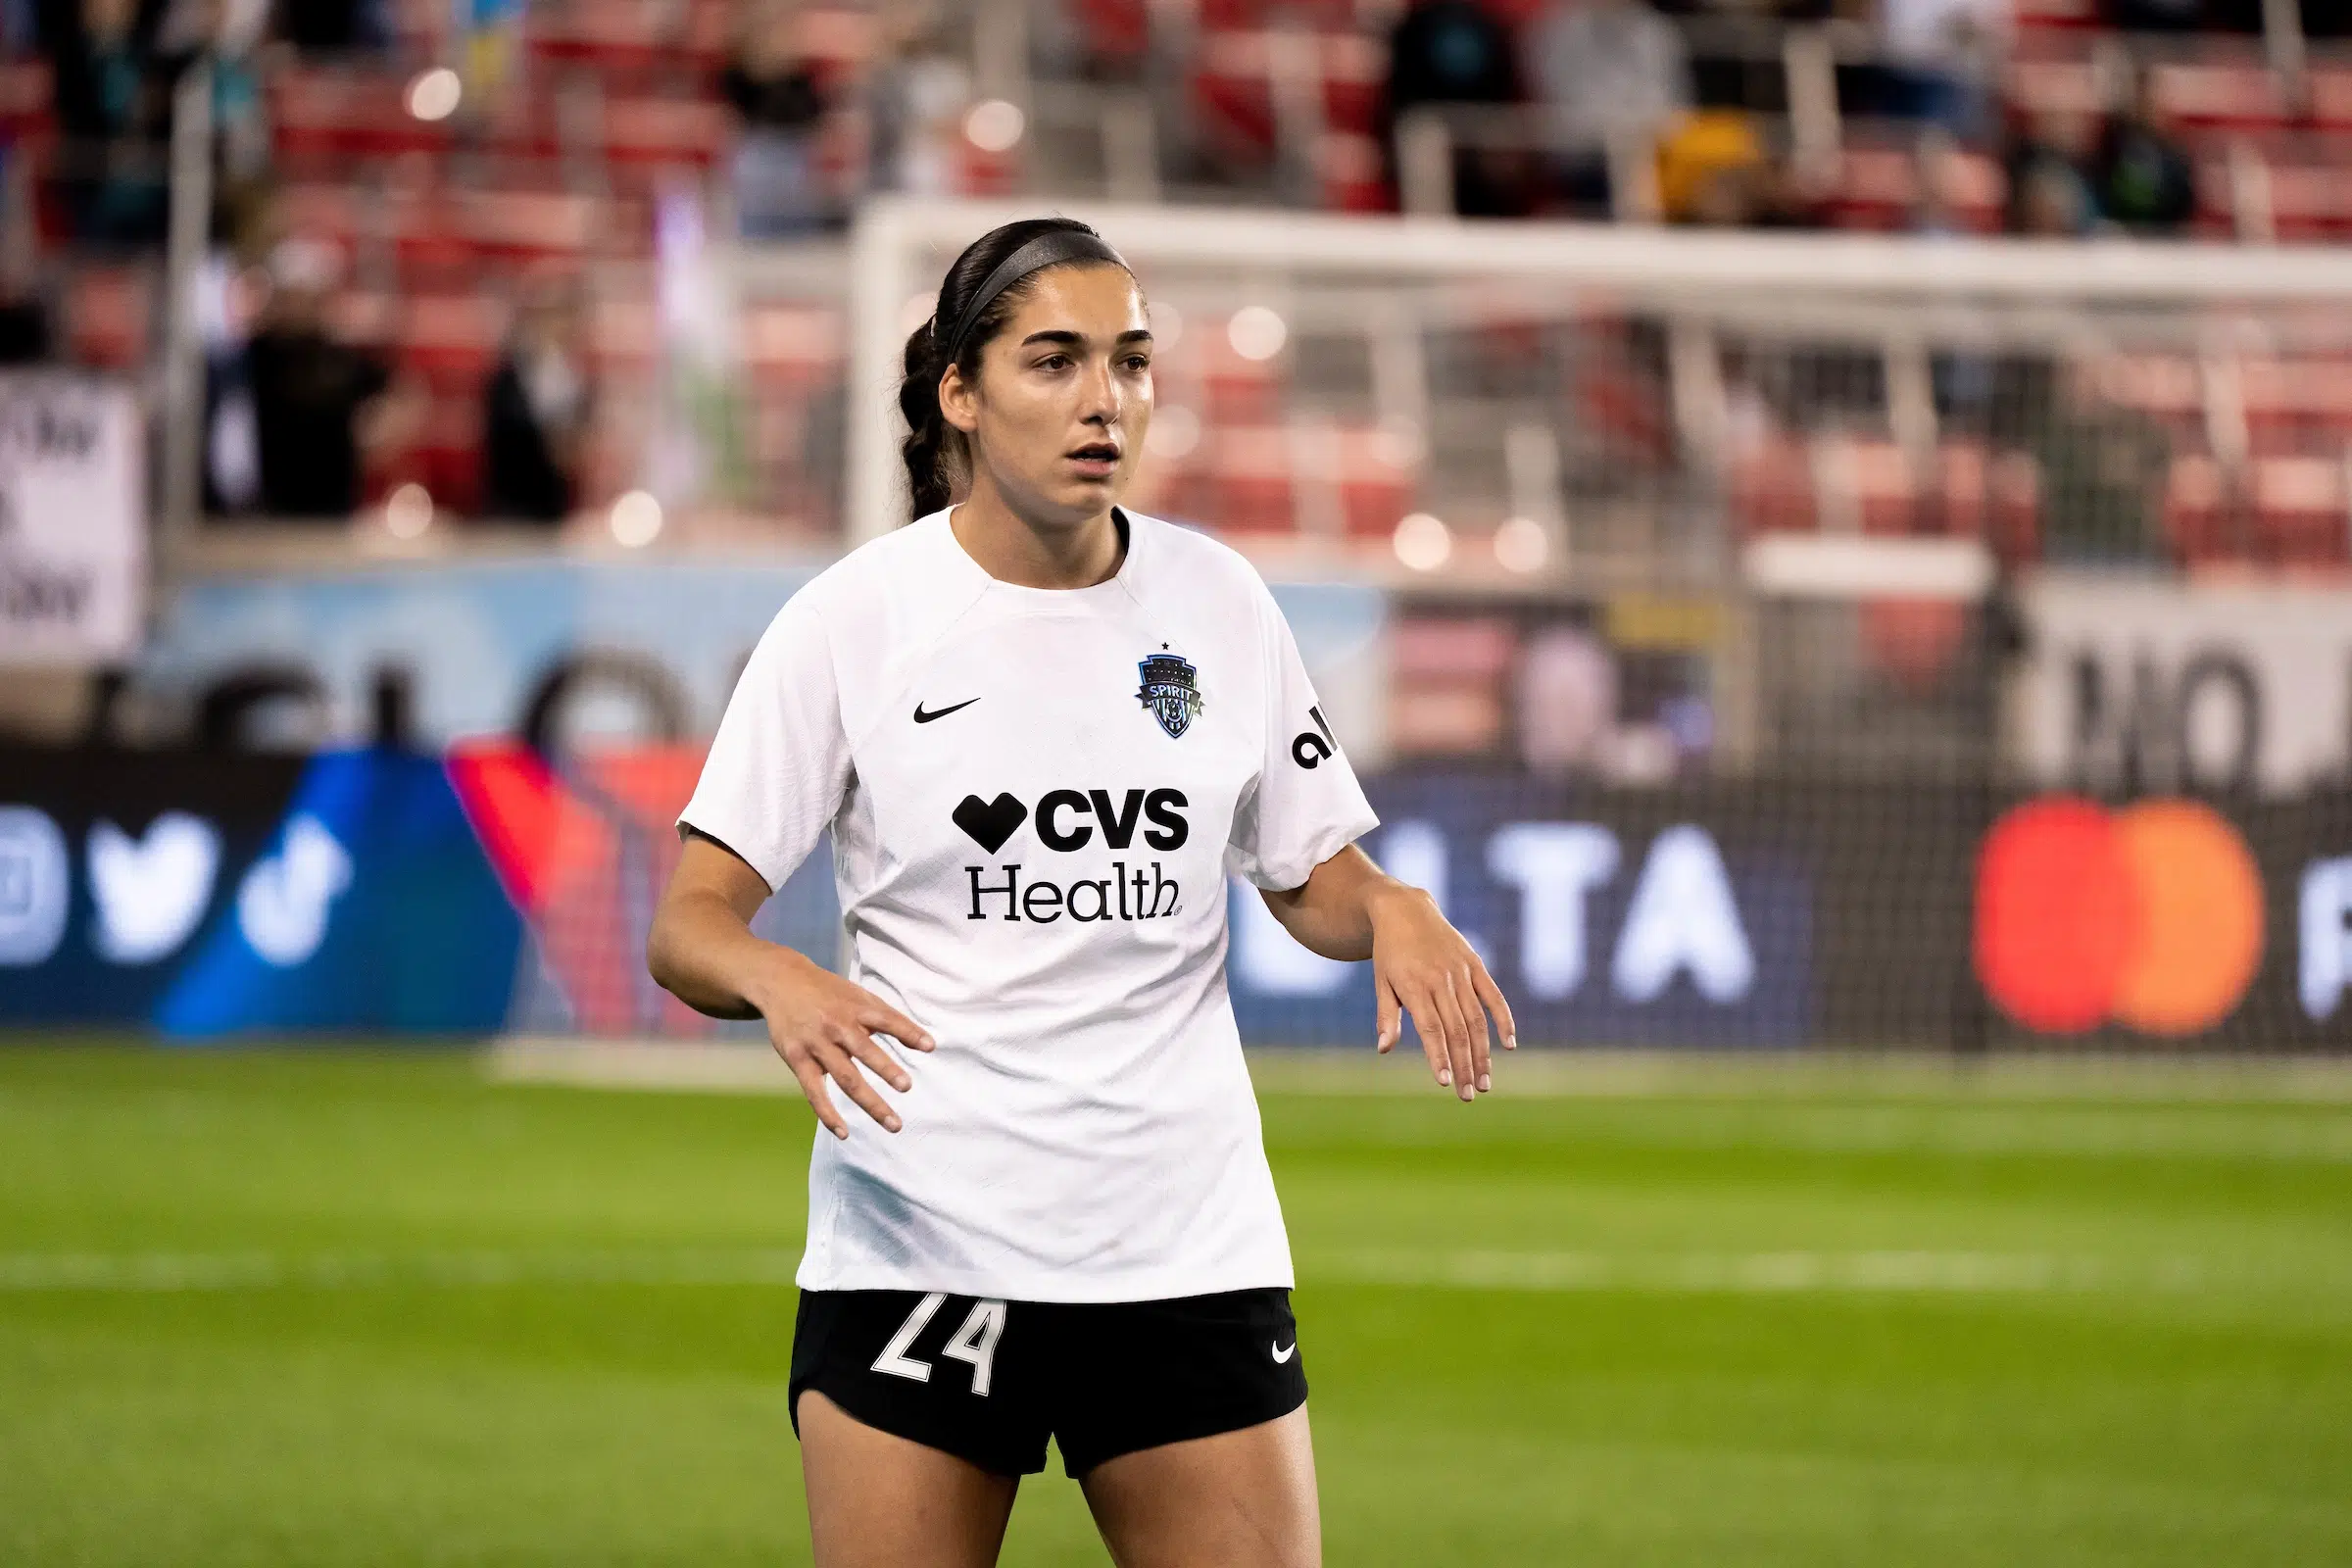 Lena Silano in a white uniform and black shorts stands on a soccer field waiting for the ball to be put back in play.